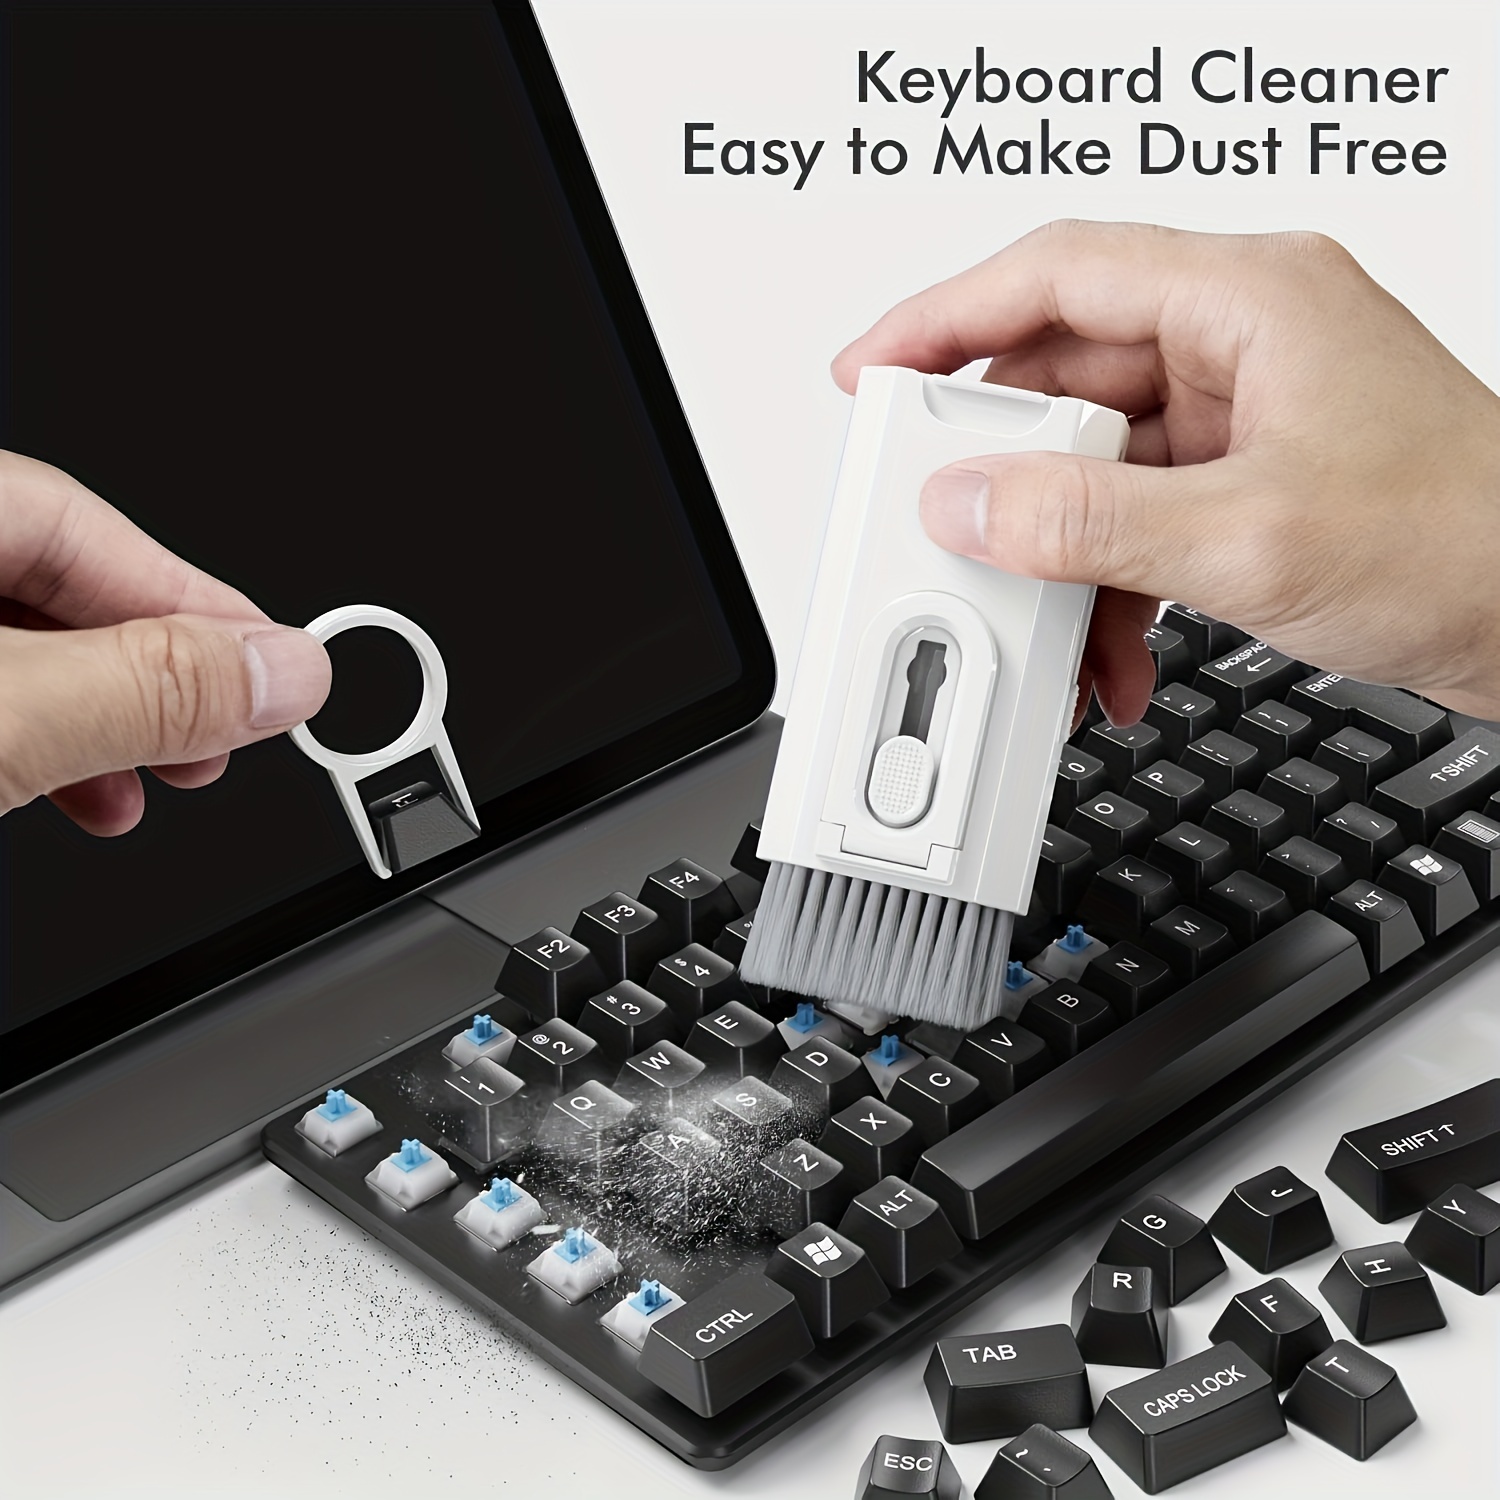 

8 In 1 Computer Keyboard Cleaning Brush Set Earphone Cleaning Pen Earphone Pad Mobile Phone Cleaning Tool Cleaning Keycap Puller Set，gift A Clean Cloth